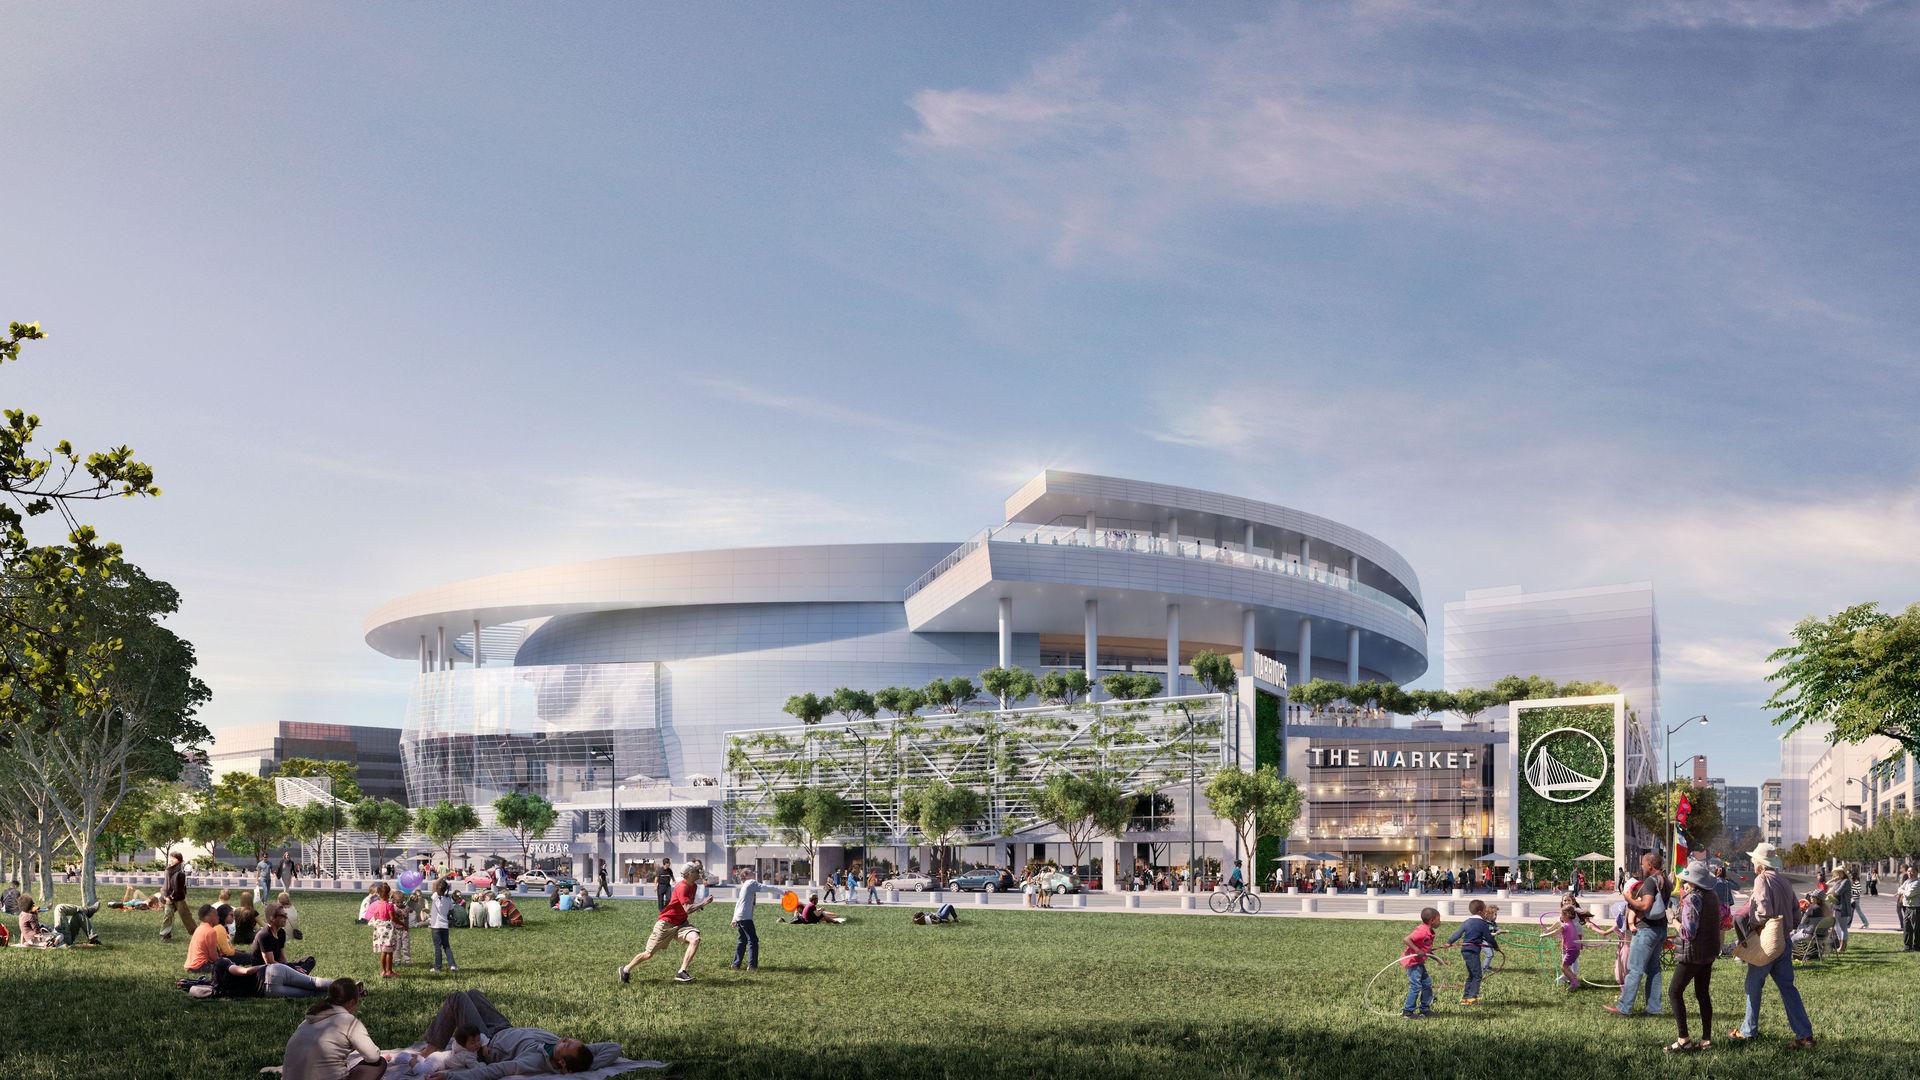 Gensler to design the interiors of the new Golden State